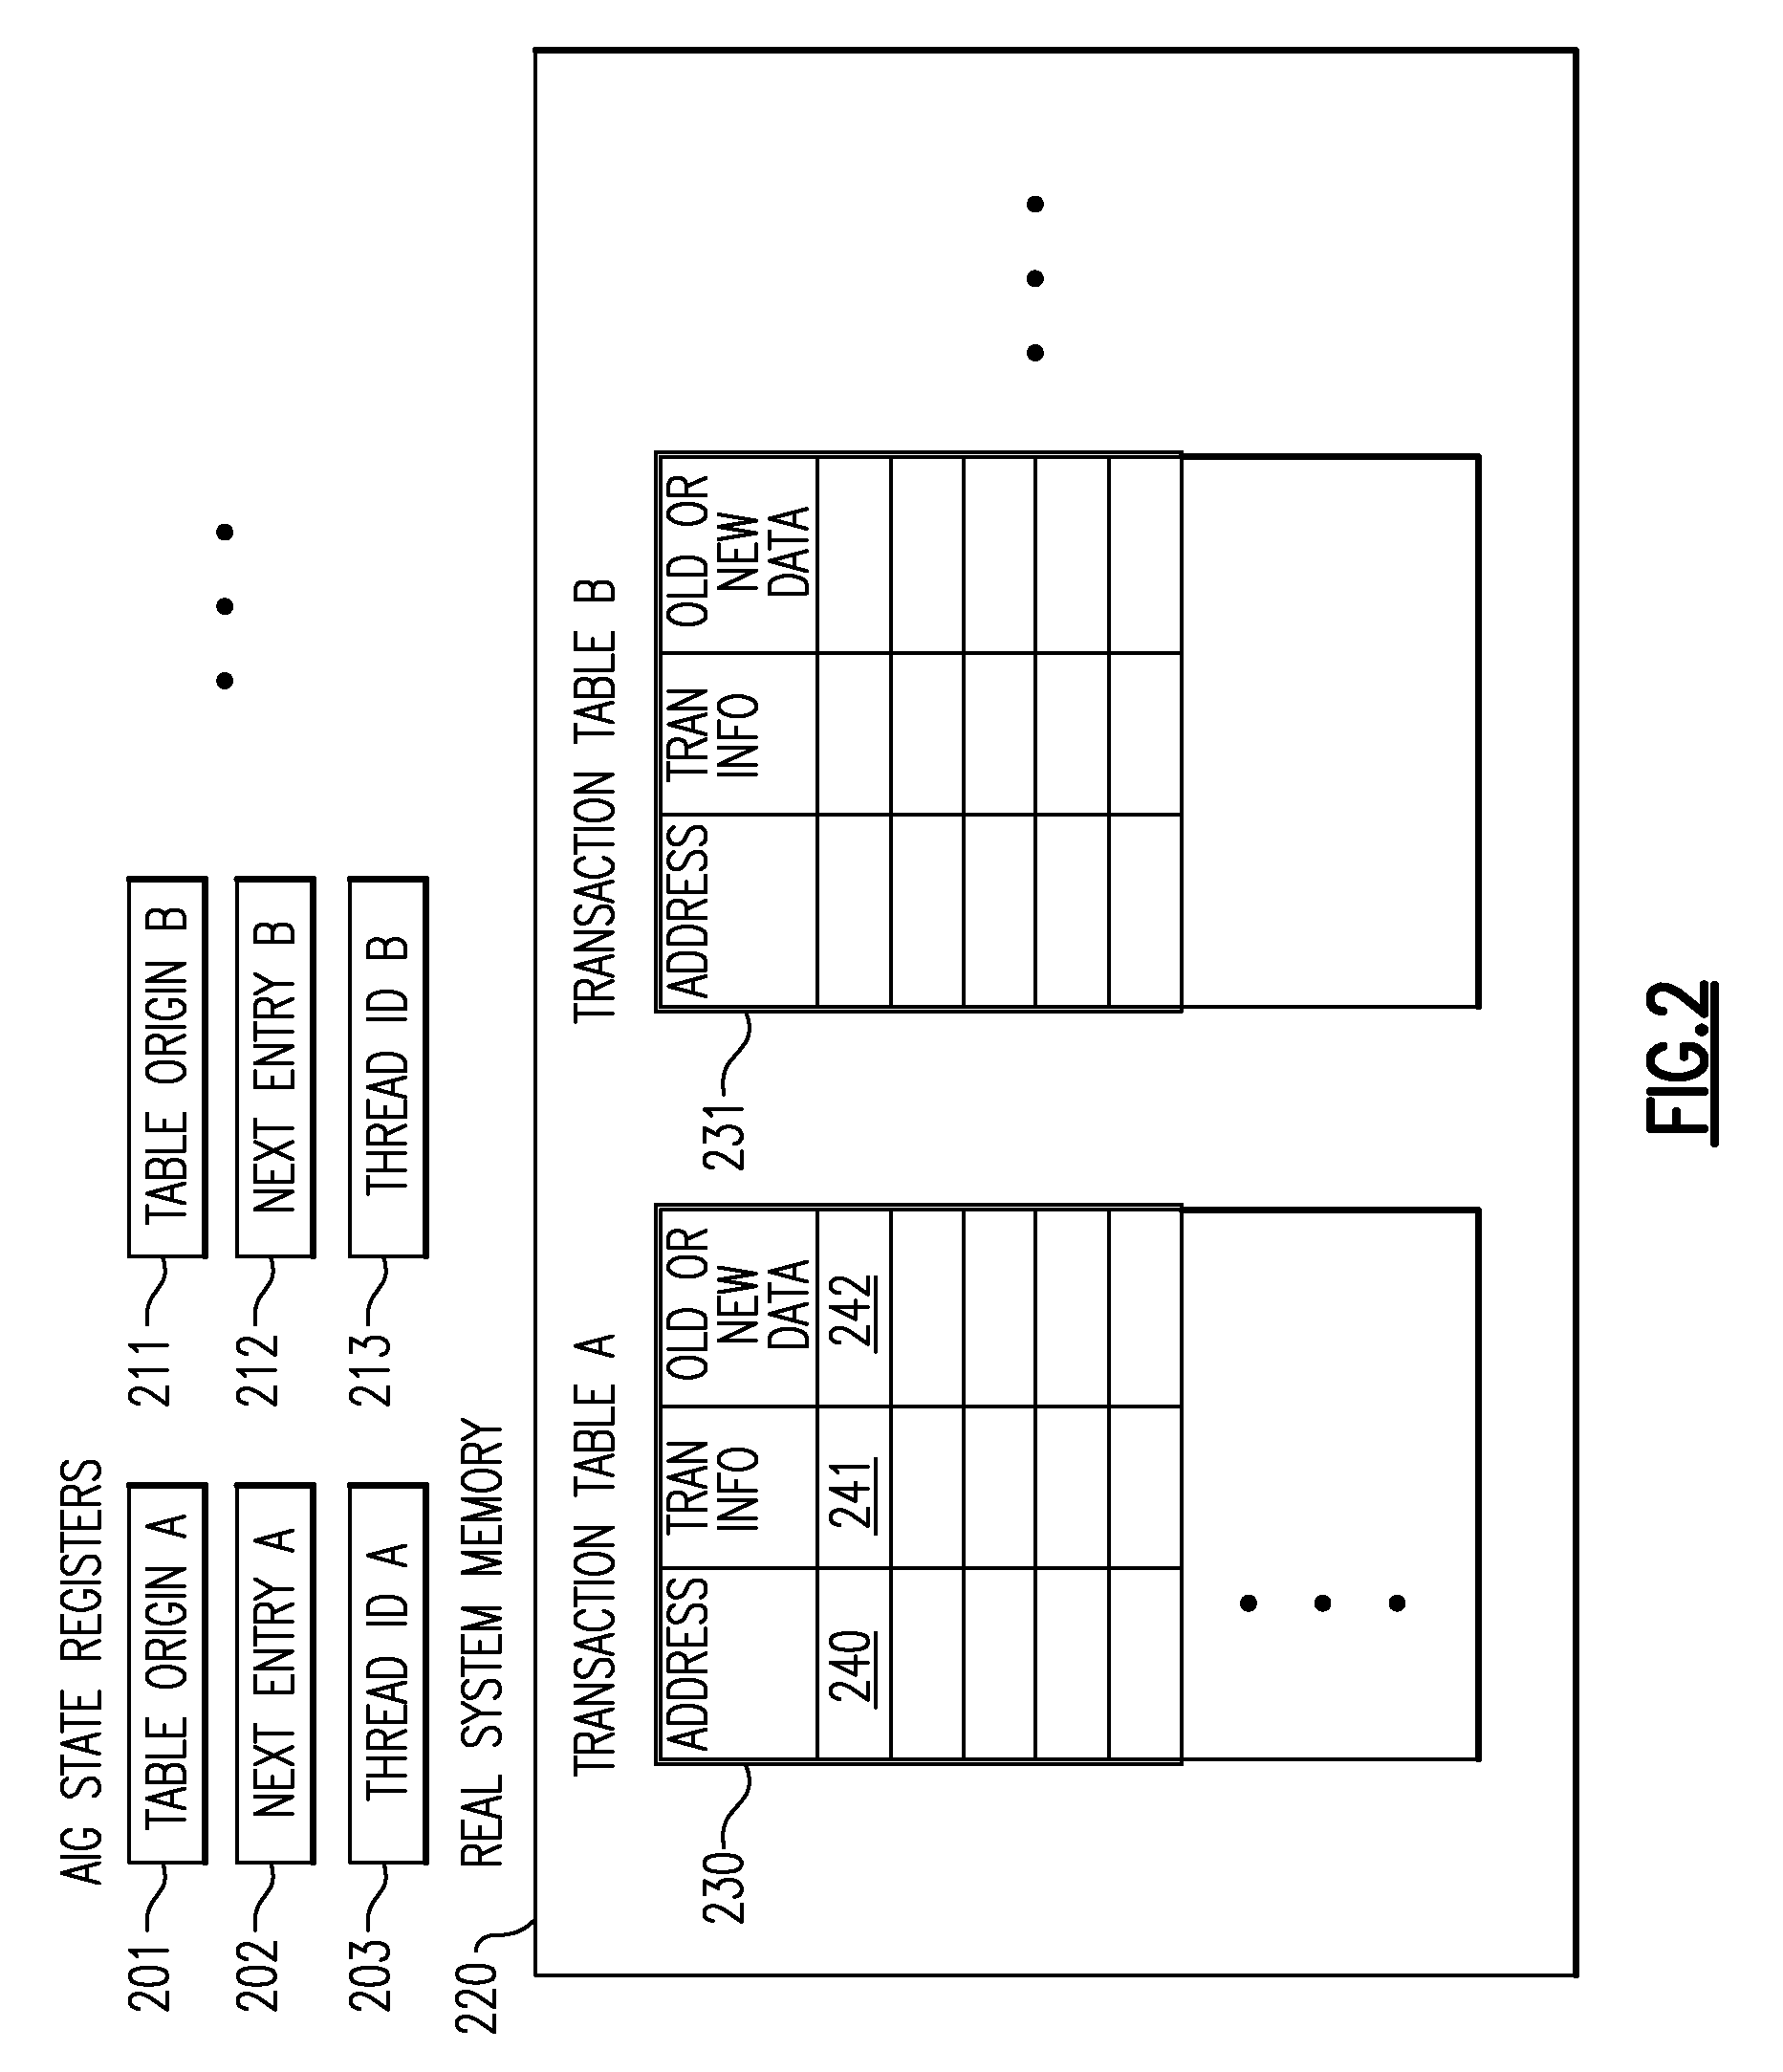 Transactional Memory System with Fast Processing of Common Conflicts